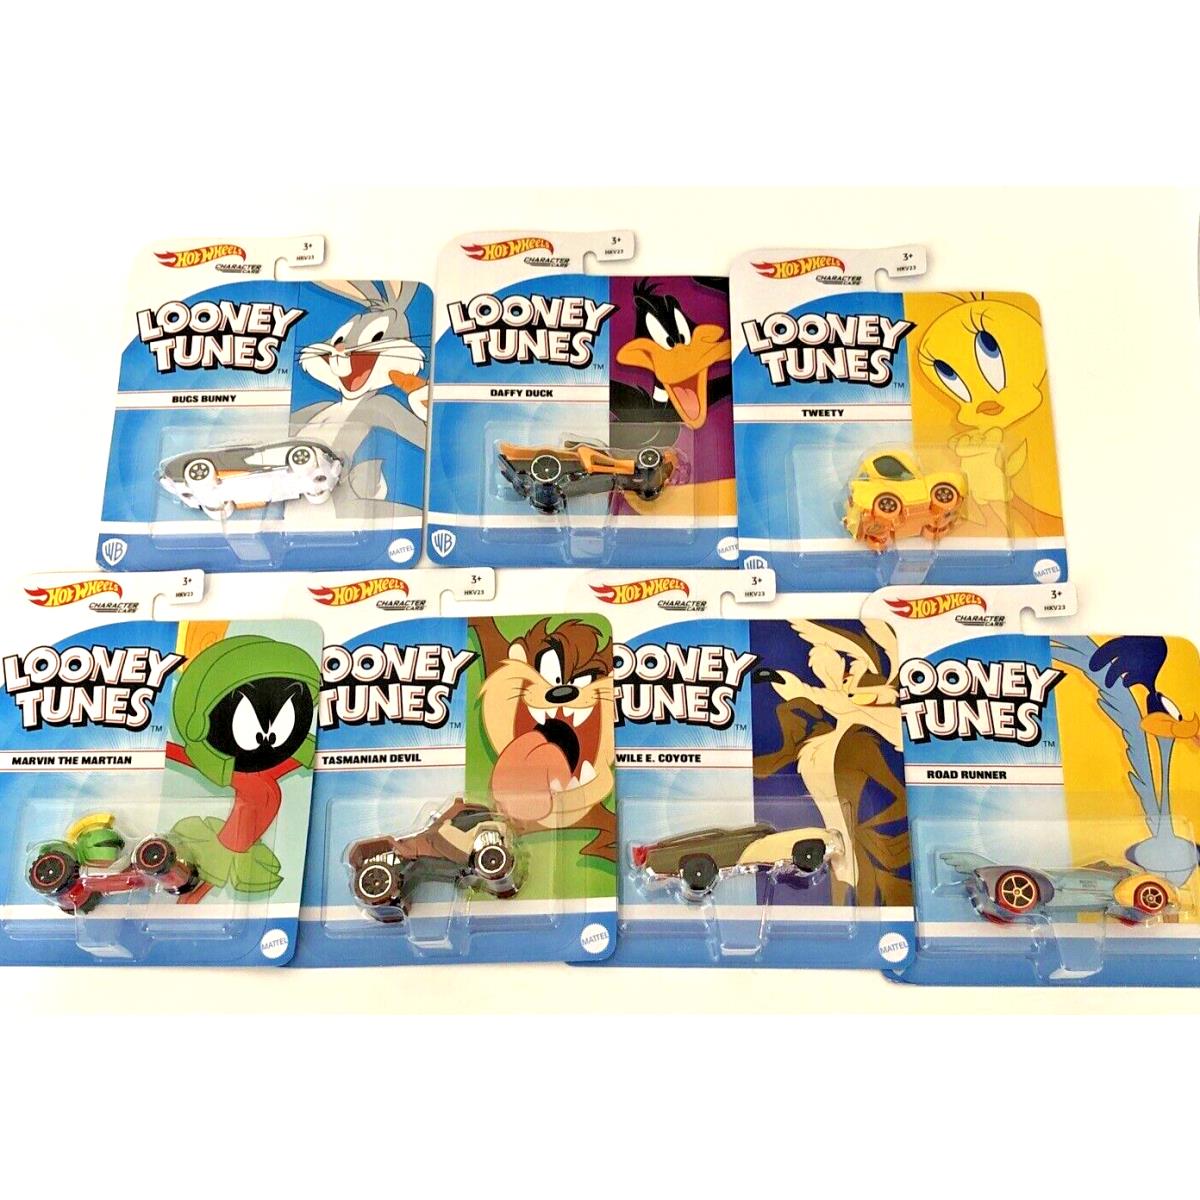 Hot Wheels Looney Tunes Character Cars 2020 Complete Set of 7 On Card